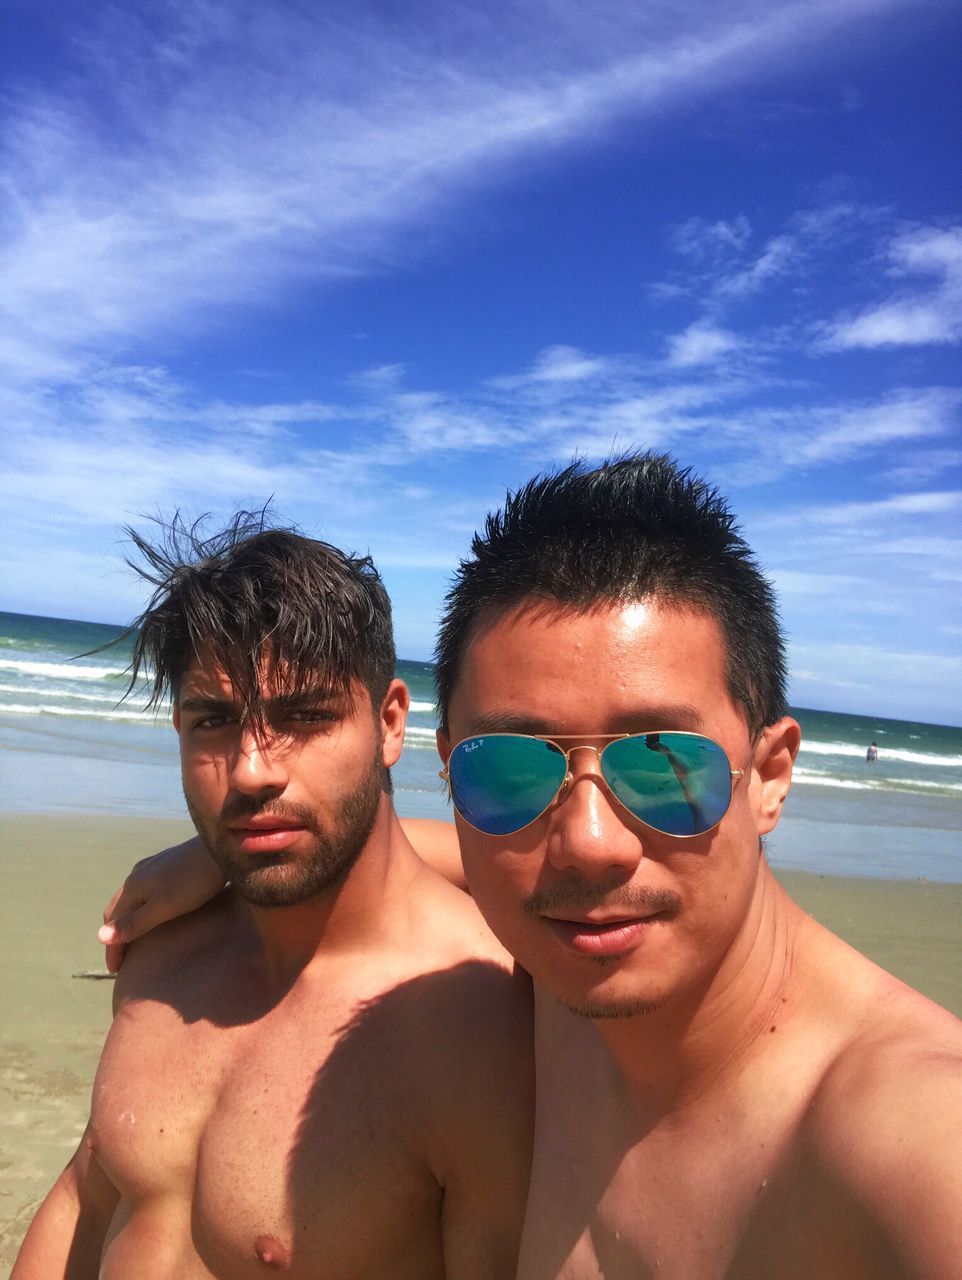 beach, looking at camera, portrait, sky, young men, sunglasses, two people, vacations, real people, lifestyles, men, headshot, young adult, togetherness, leisure activity, sea, close-up, day, shirtless, outdoors, people, only men, adult, adults only, holi